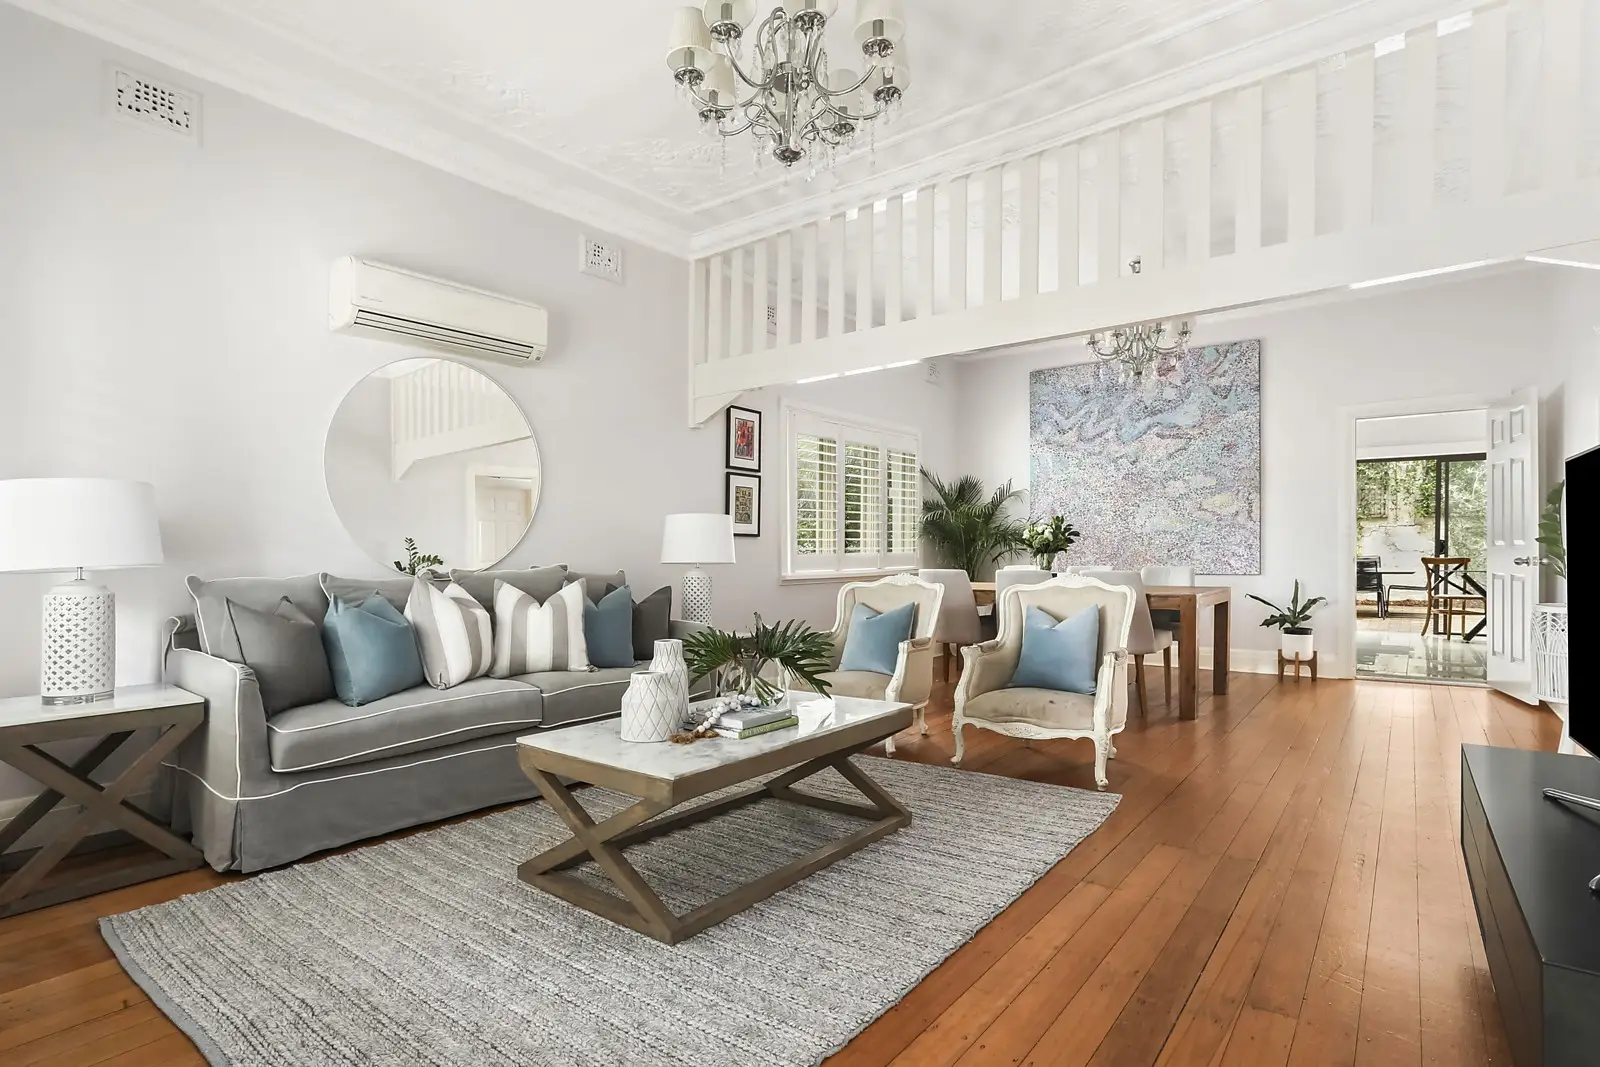 Photo #2: 16 Woodland Street, Coogee - Sold by Sydney Sotheby's International Realty